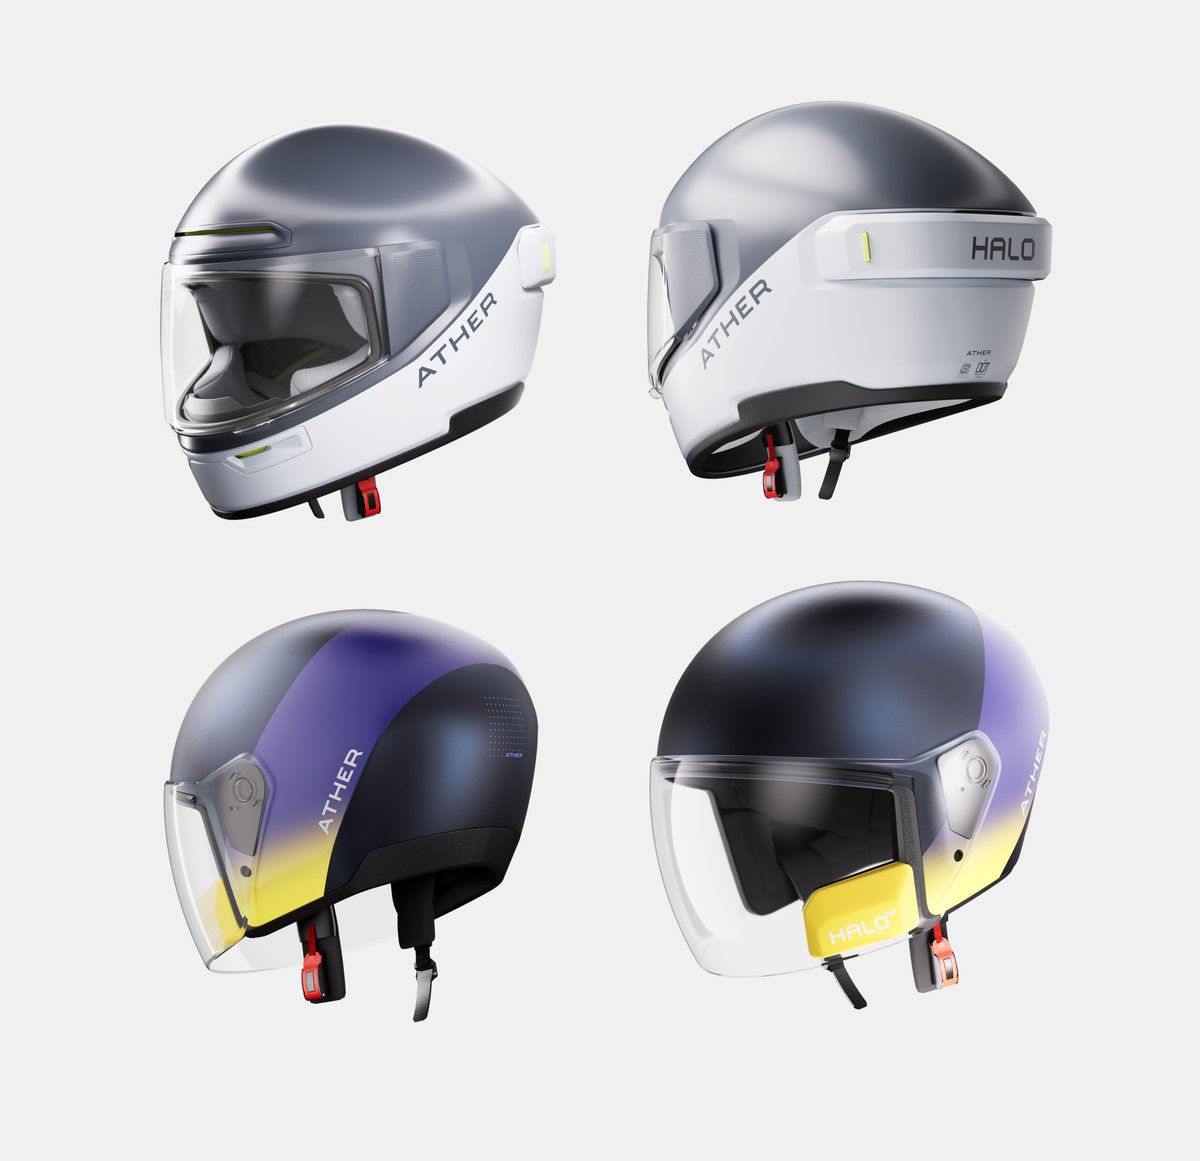 Halo + Halo bit.

Seamless connectivity, premium sound, and the highest safety standards.

Learn what sets them both apart at shop.atherenergy.com/collections/sm…

#Ather #SmartHelmet #AtherHalo #NewLaunch